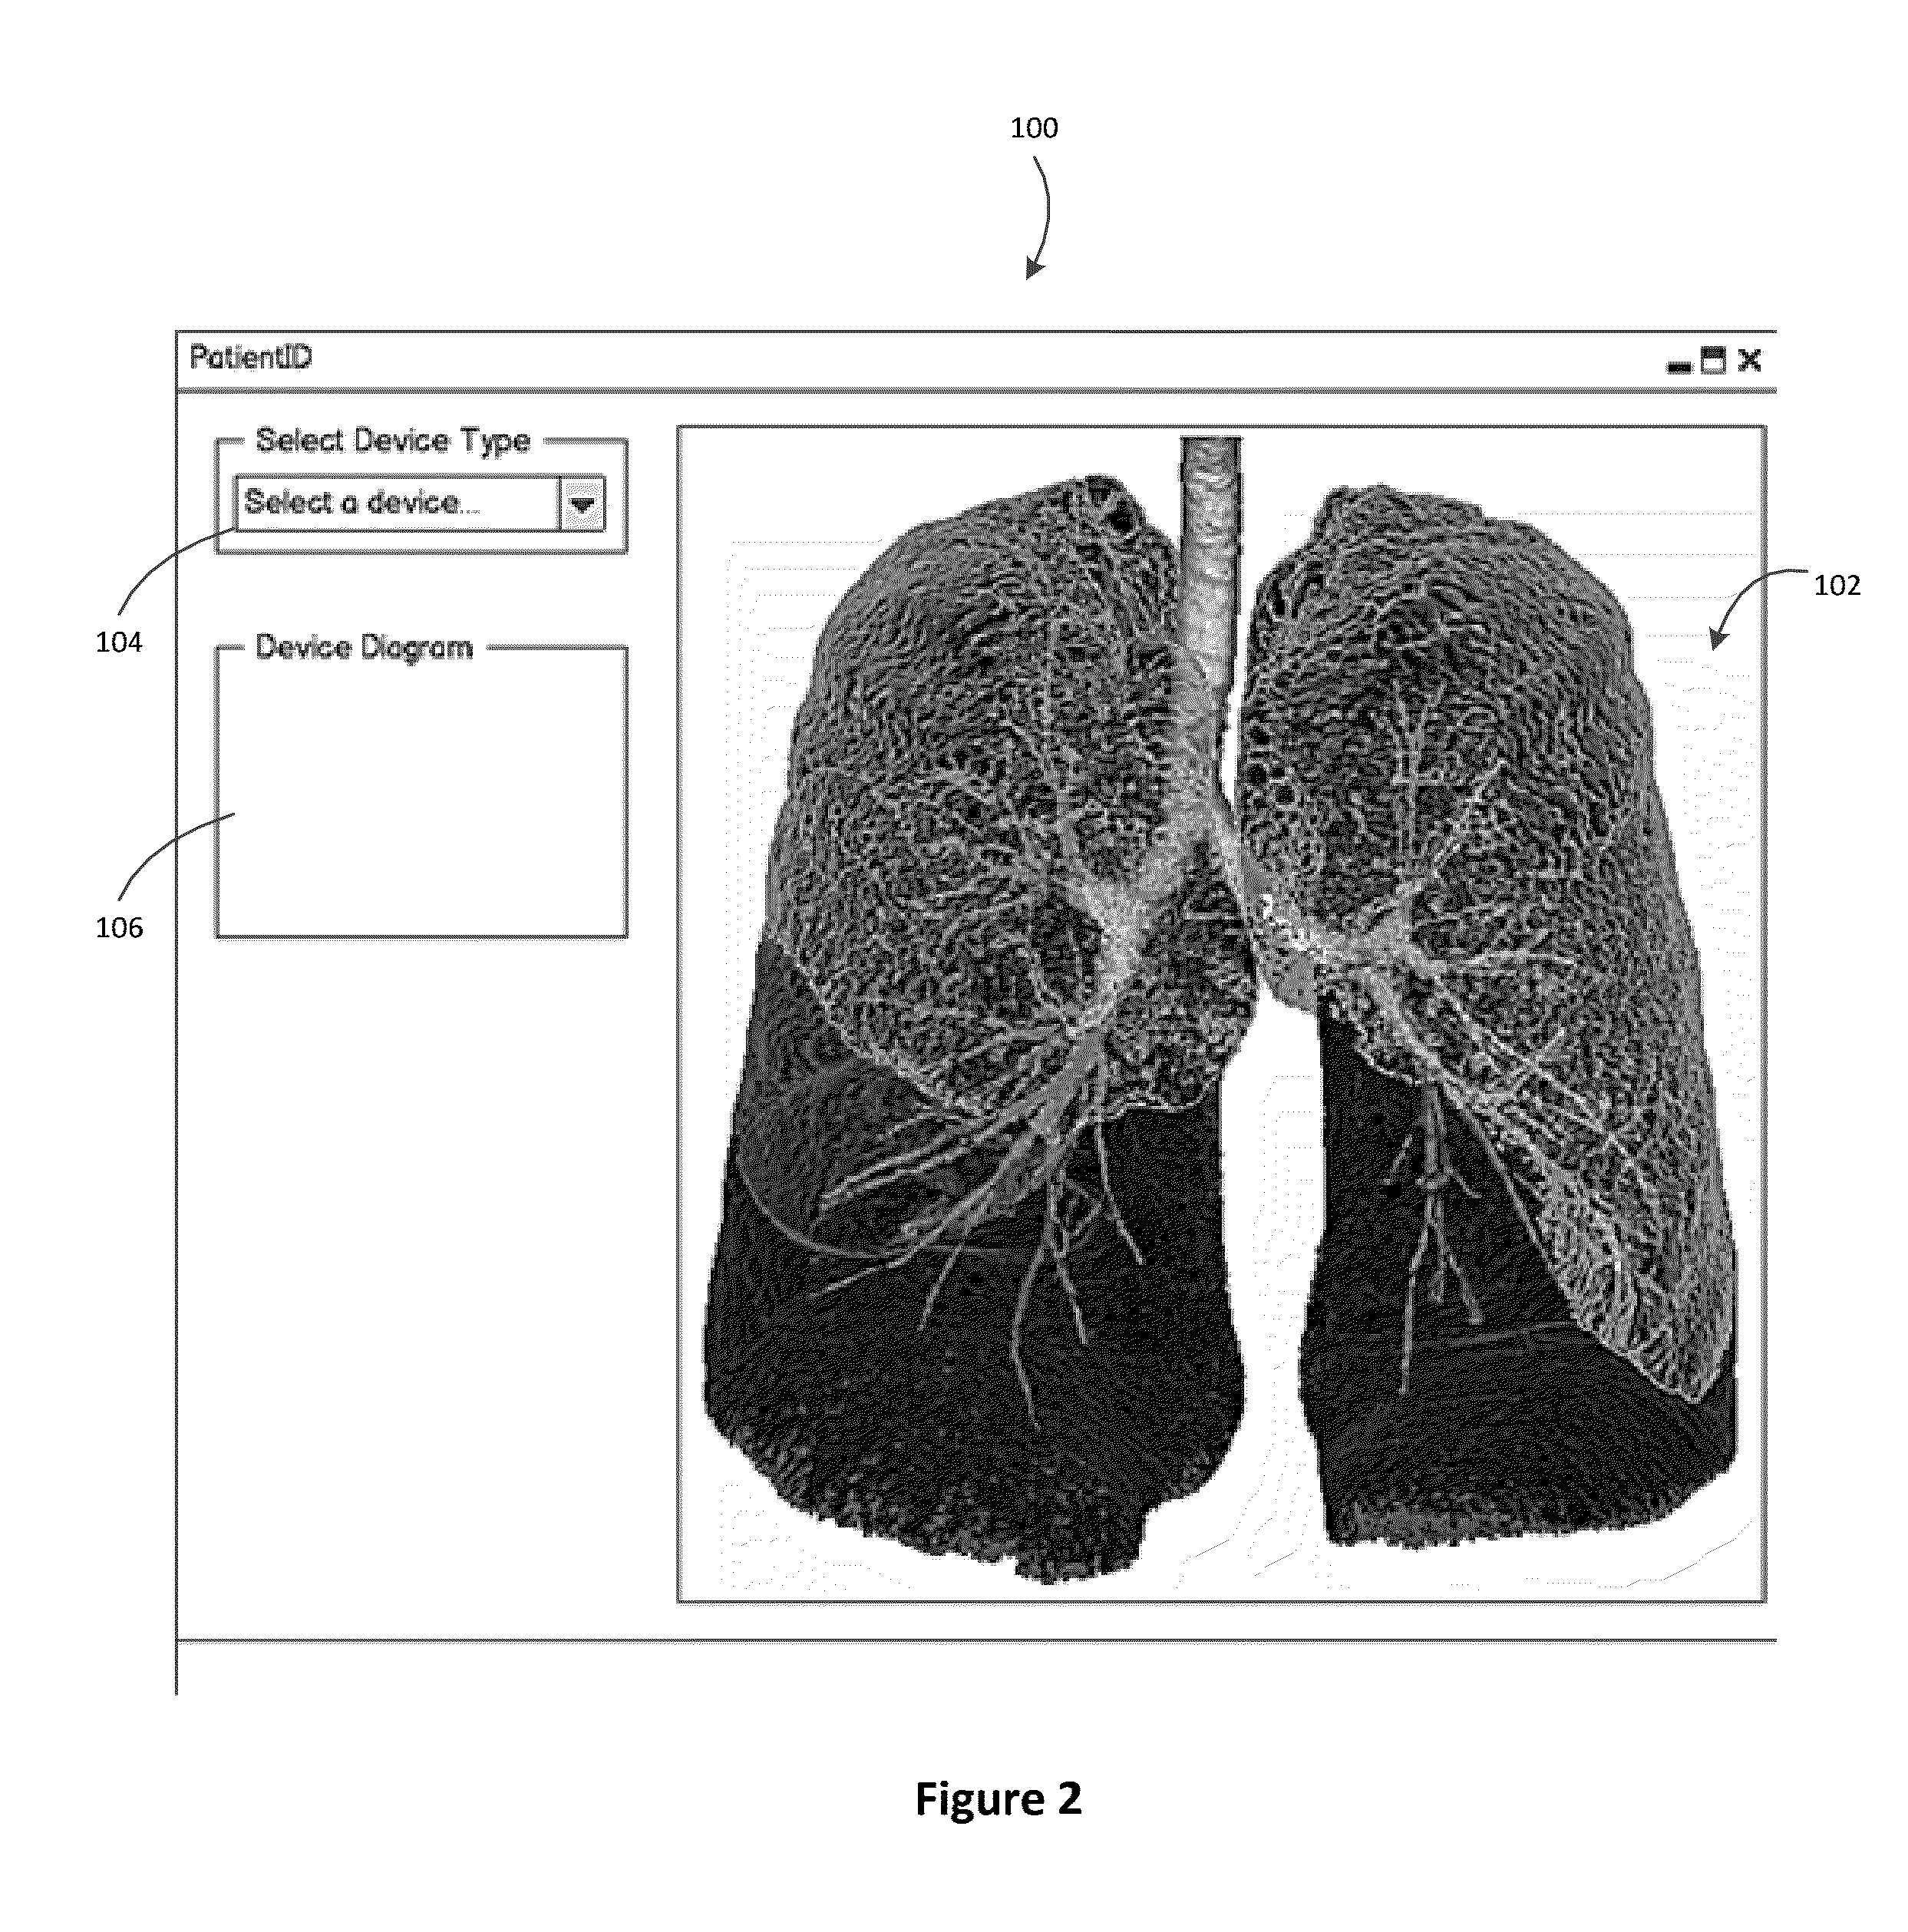 Treatment planning for lung volume reduction procedures